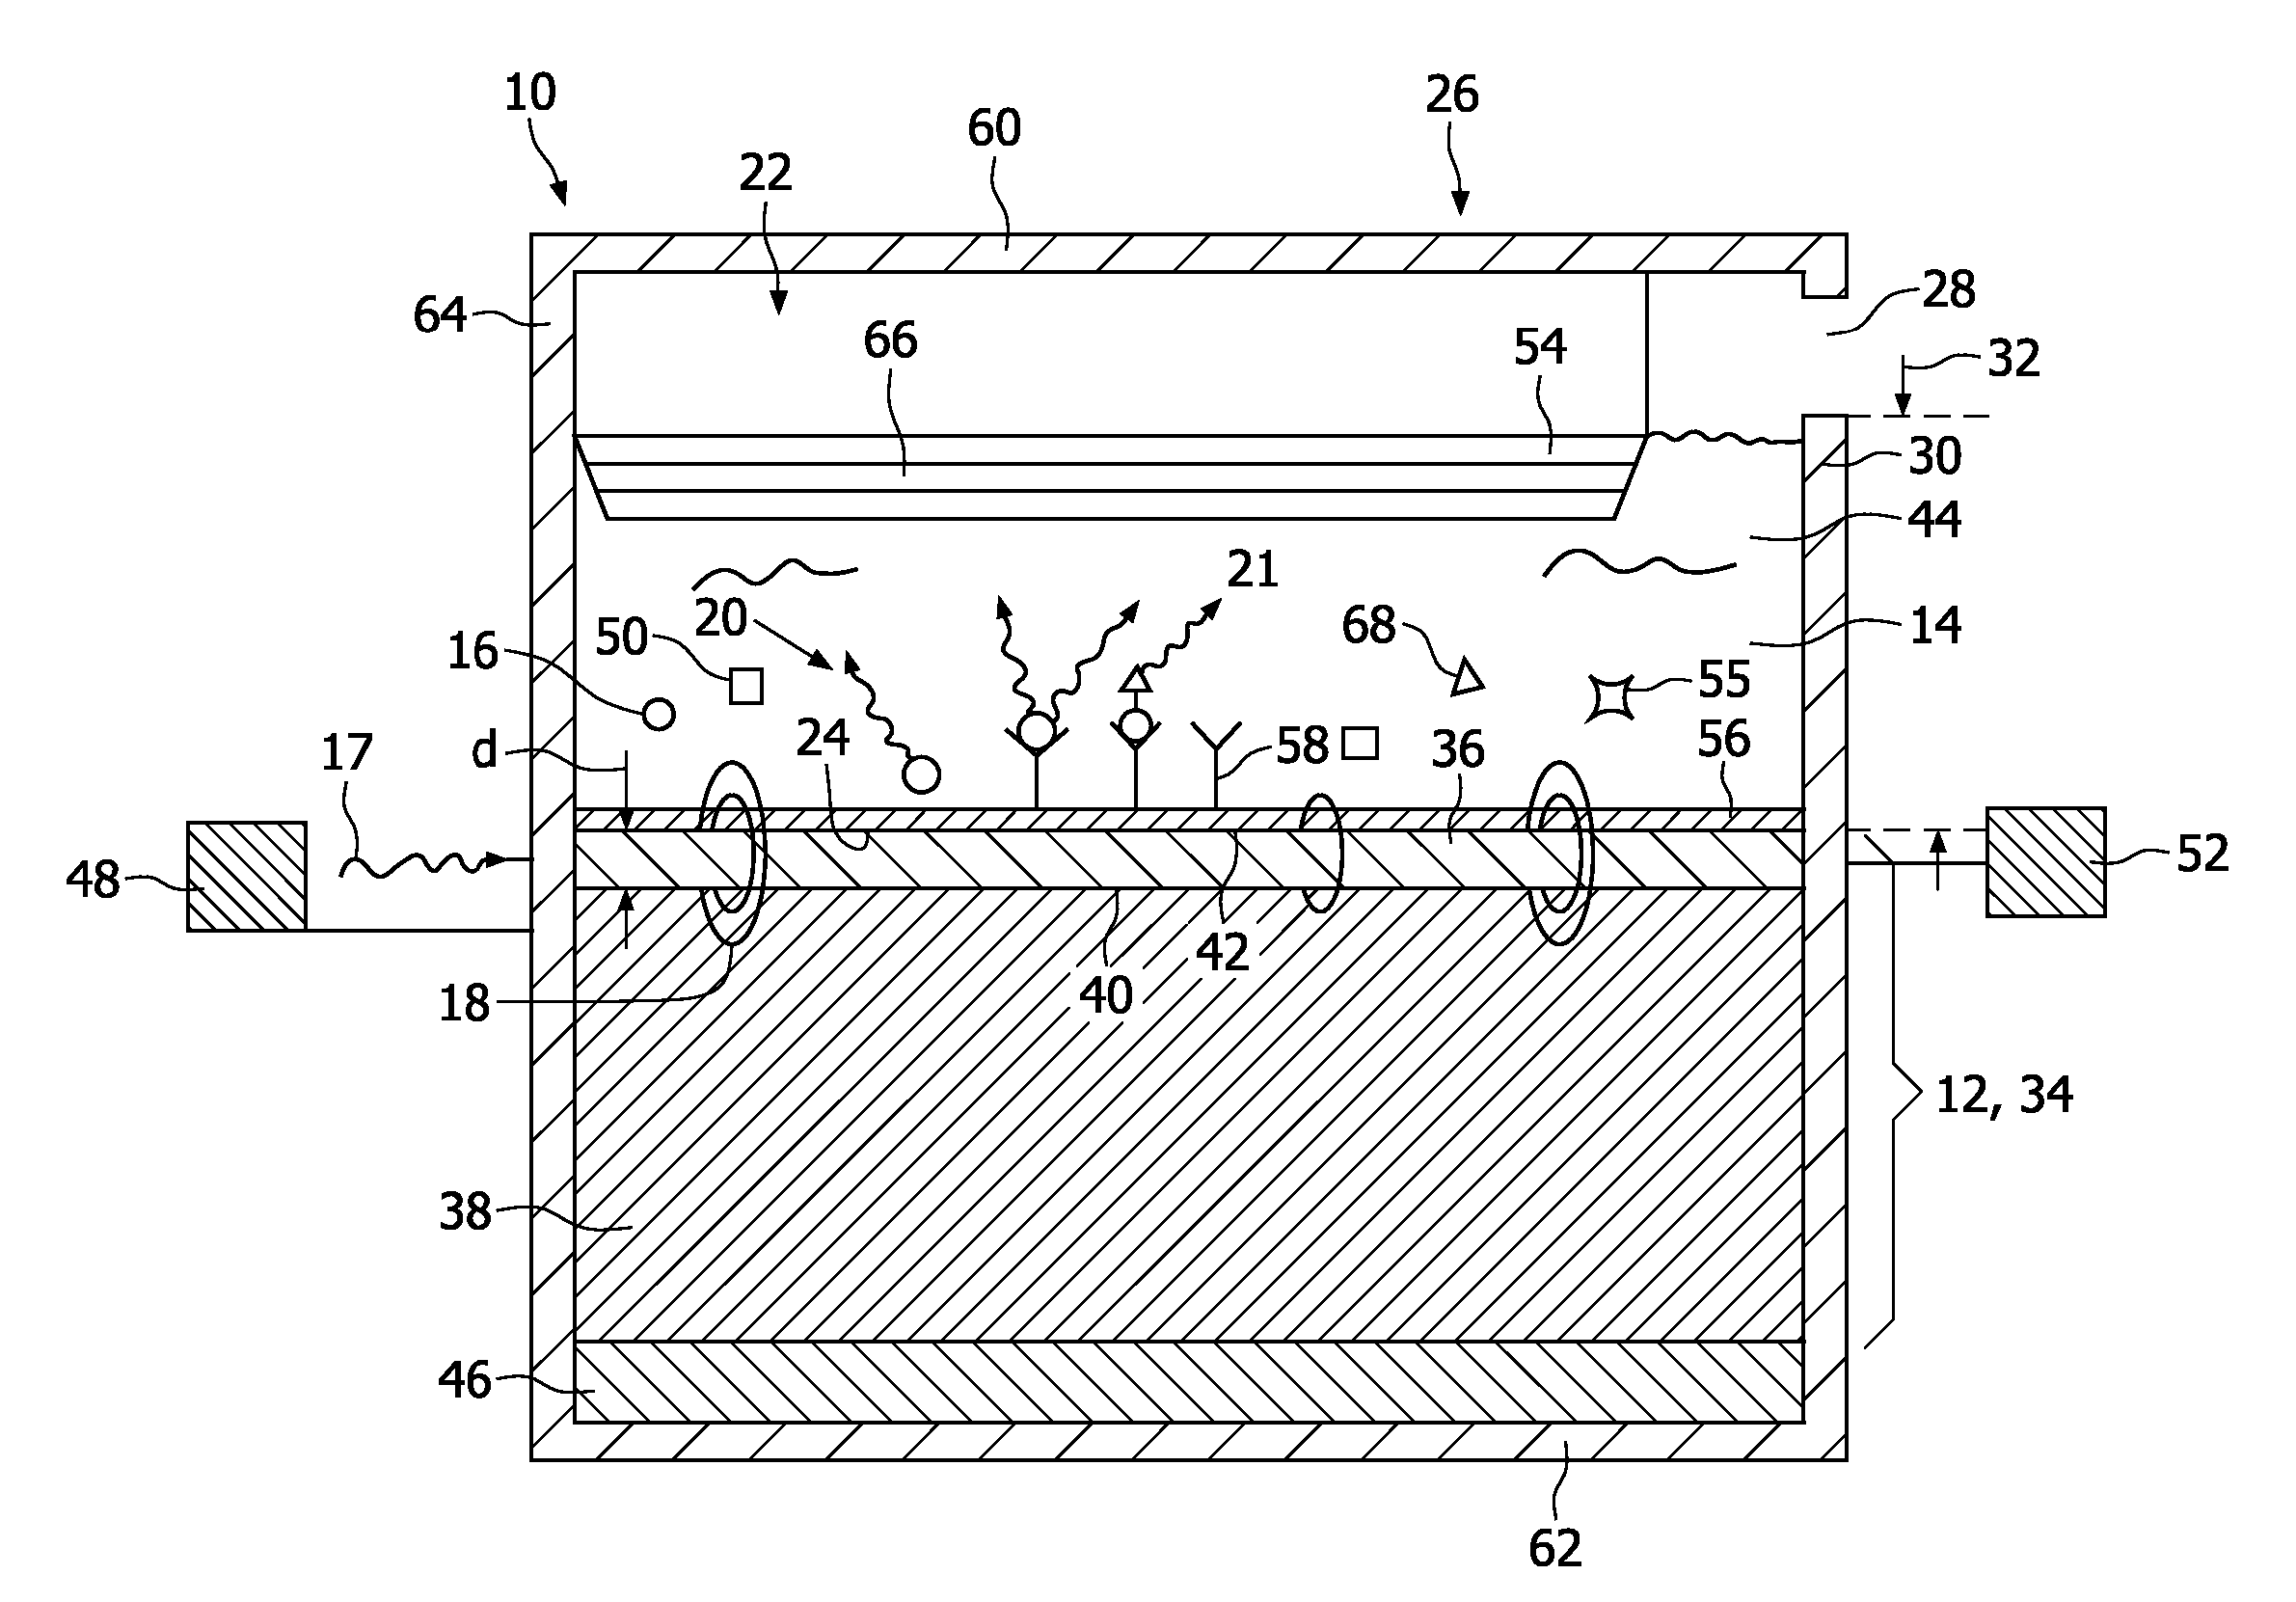 Biosensor device and method for detecting molecules in an analyte